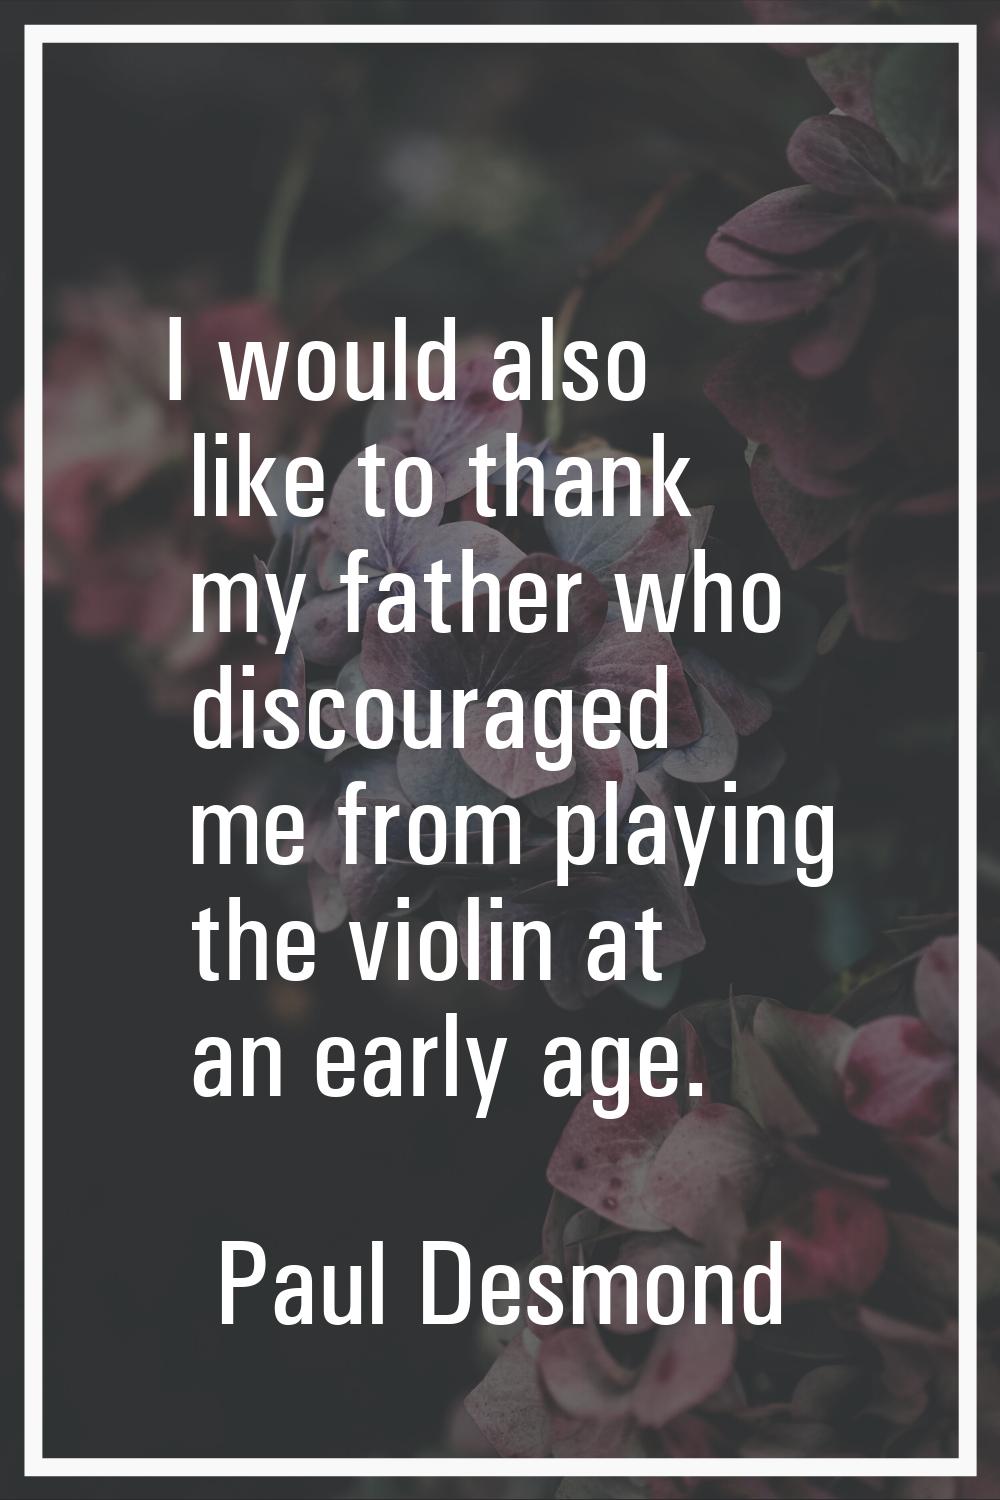 I would also like to thank my father who discouraged me from playing the violin at an early age.